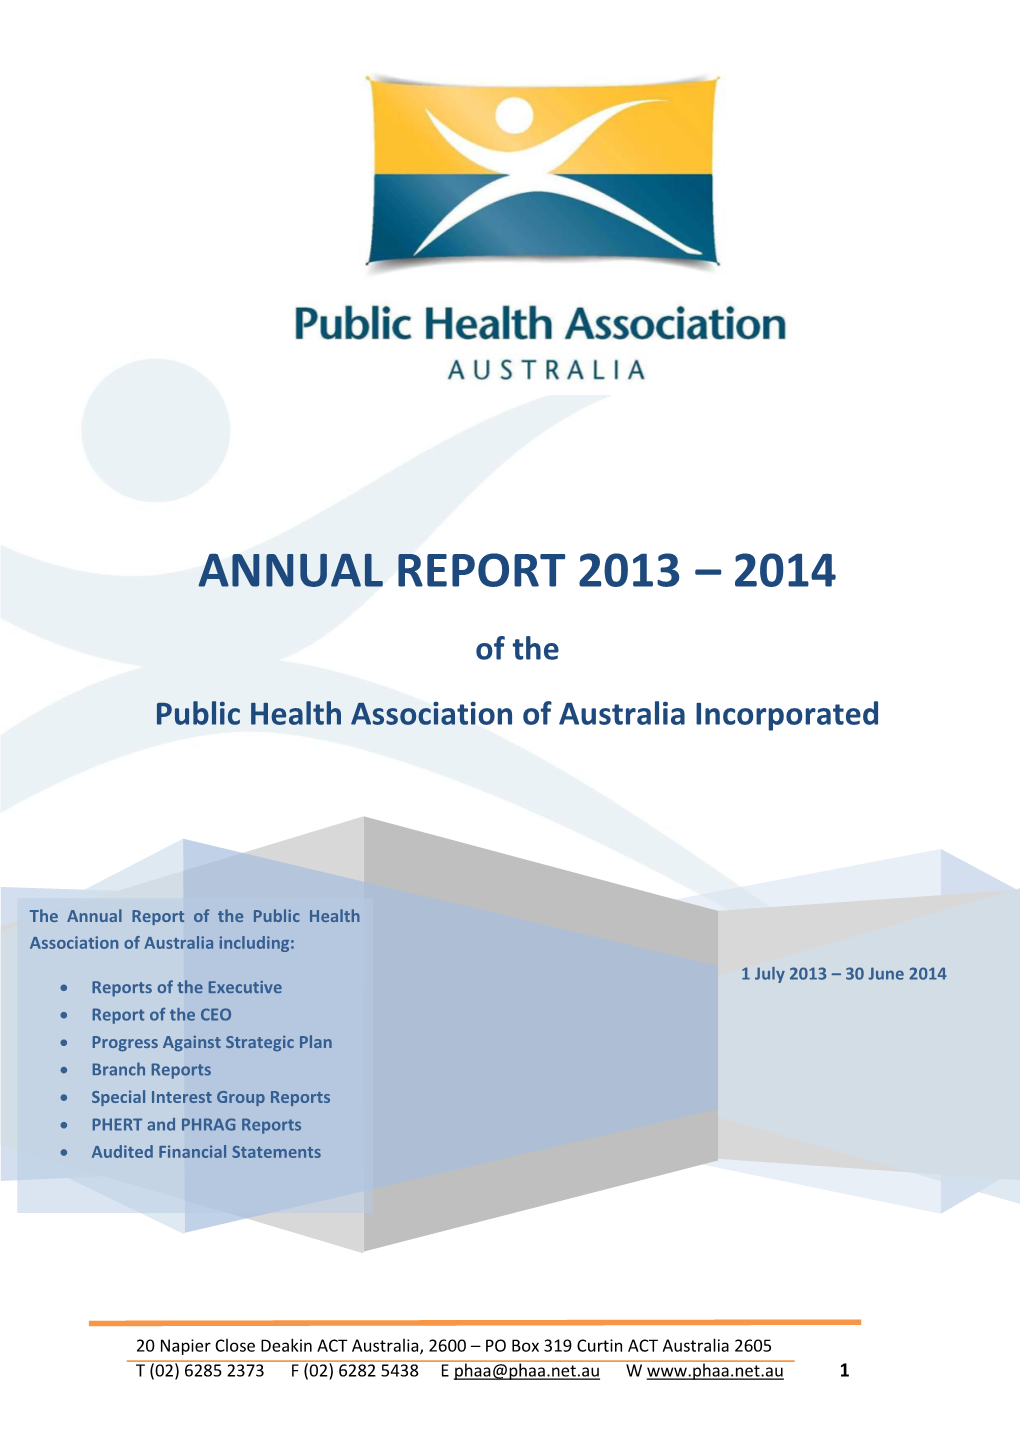 ANNUAL REPORT 2013 – 2014 Of